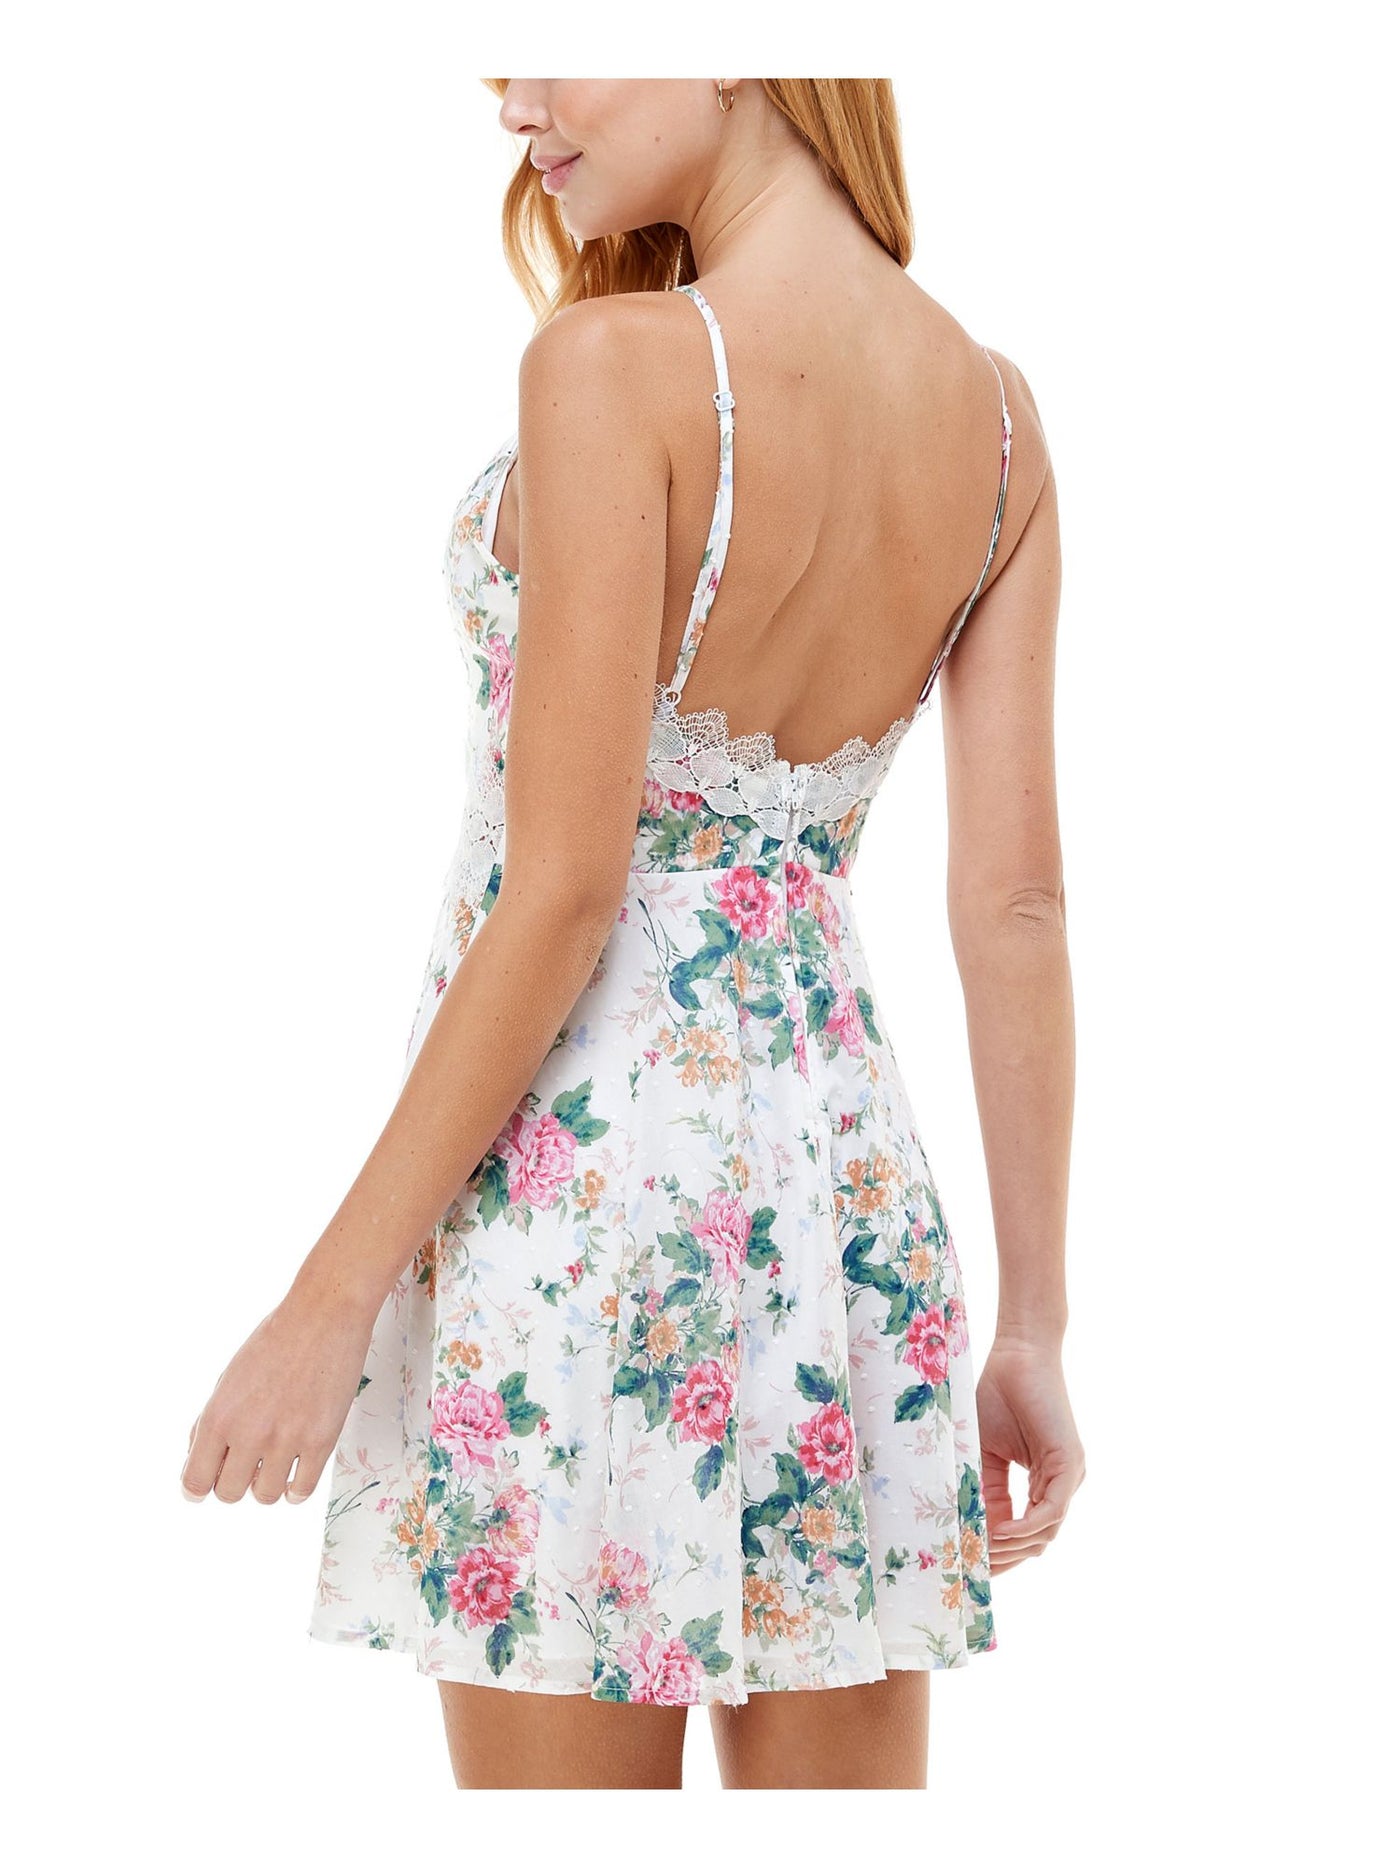 CITY STUDIO Womens Ivory Floral Halter Above The Knee Fit + Flare Dress Juniors 7